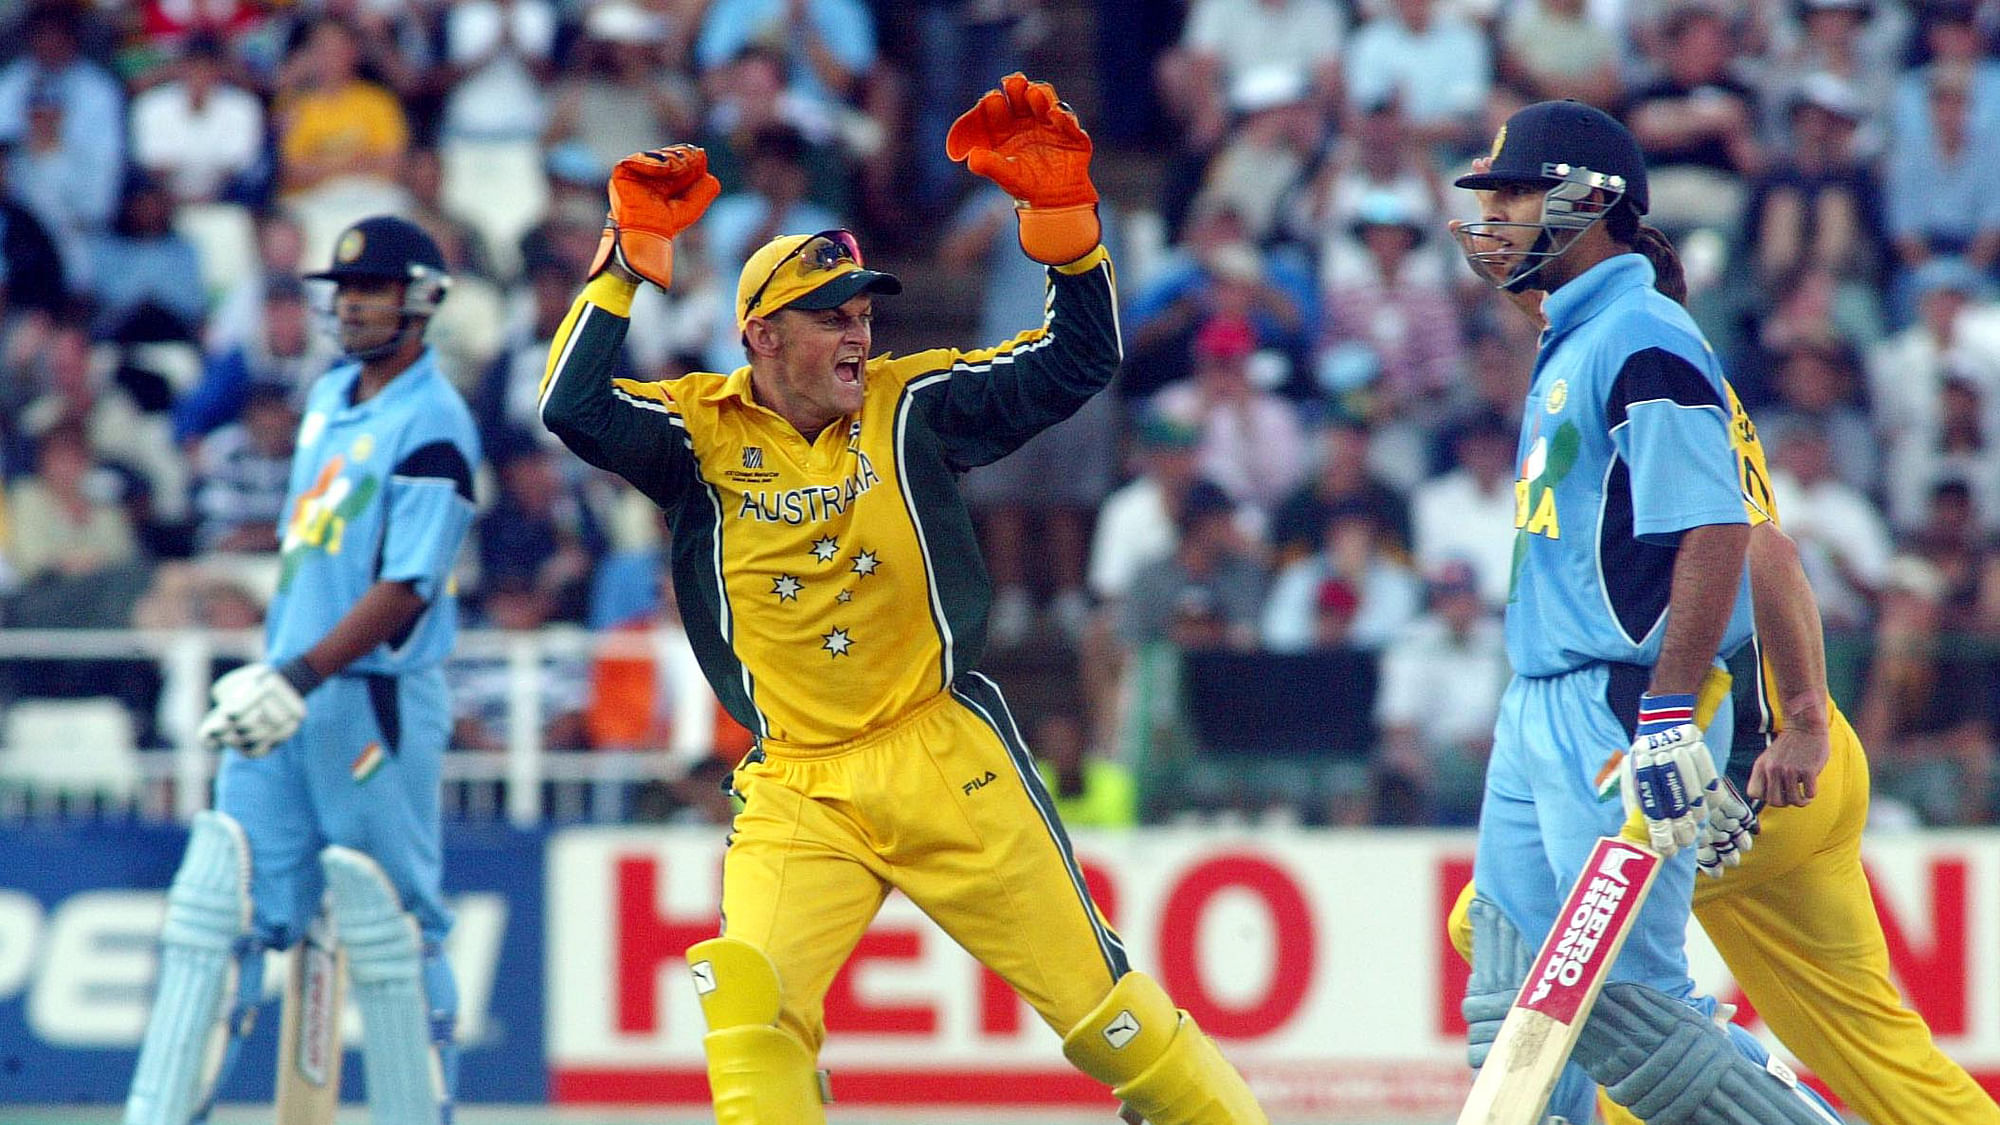 Australia’s Adam Gilchrist celebrates in front of India’s Yuvraj Singh after his dismissal during the 2008 ICC World Cup final.